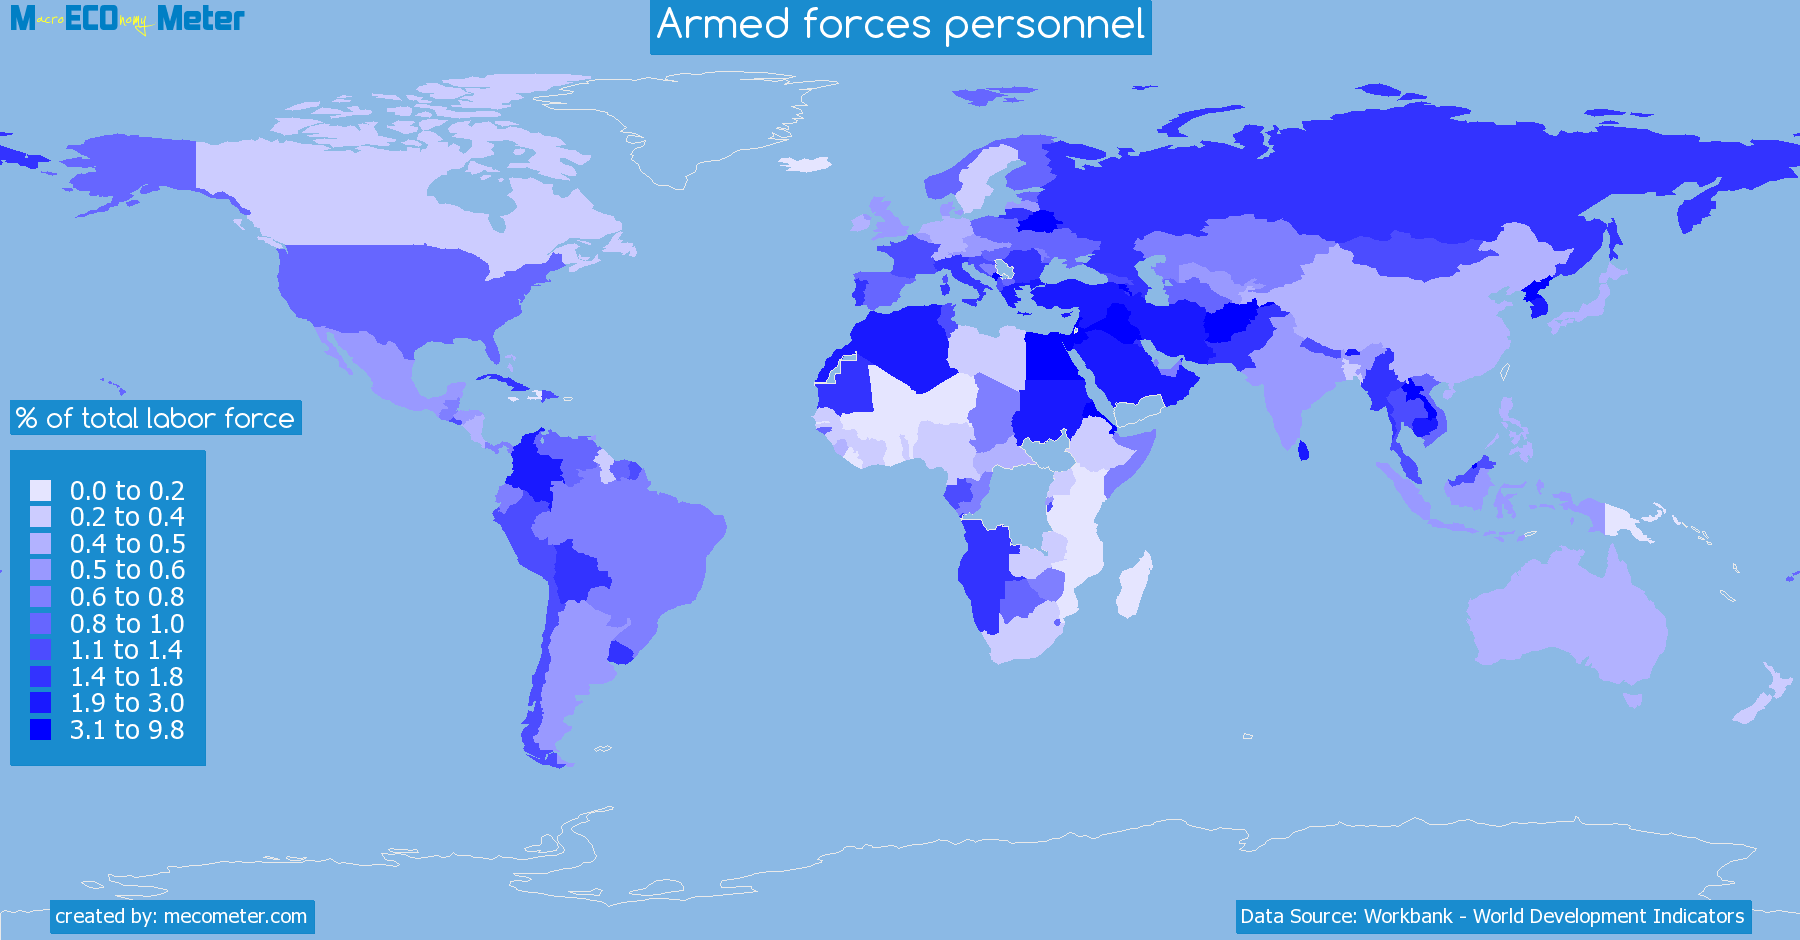 Worldmap of all countries colored to reflect the values of Armed forces personnel